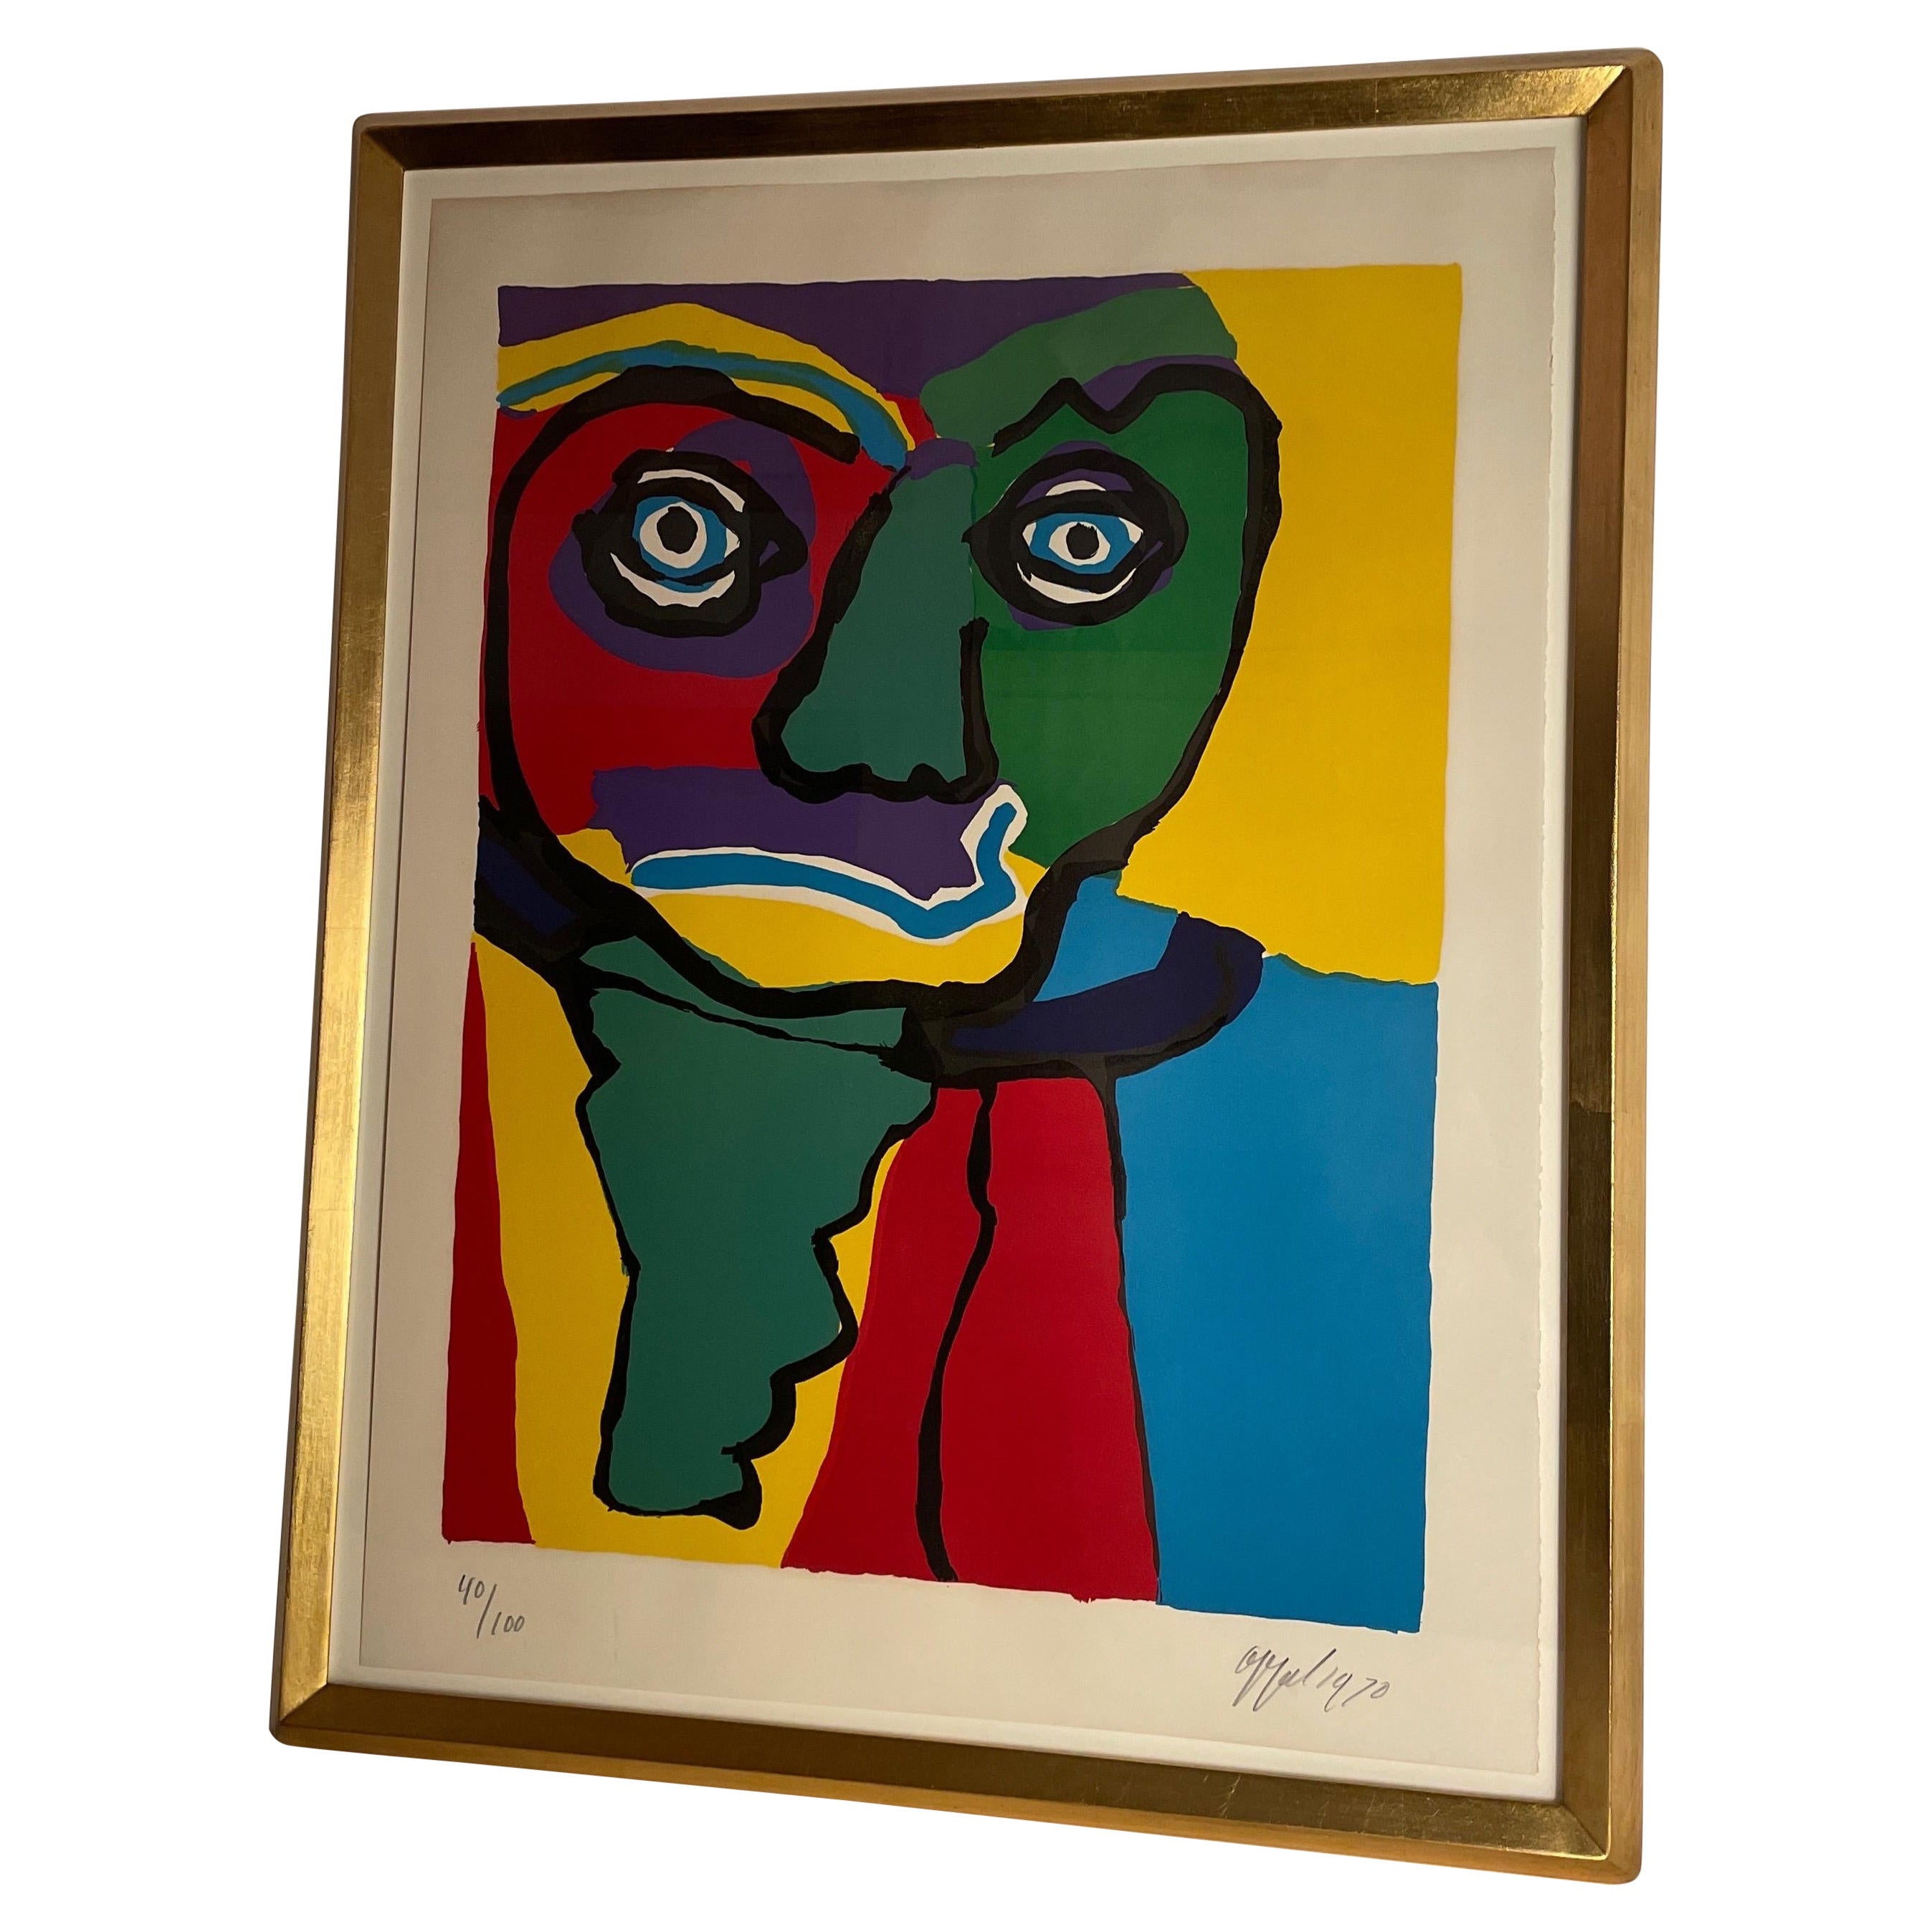 Signed lithograph “personage” by Karelia Appel